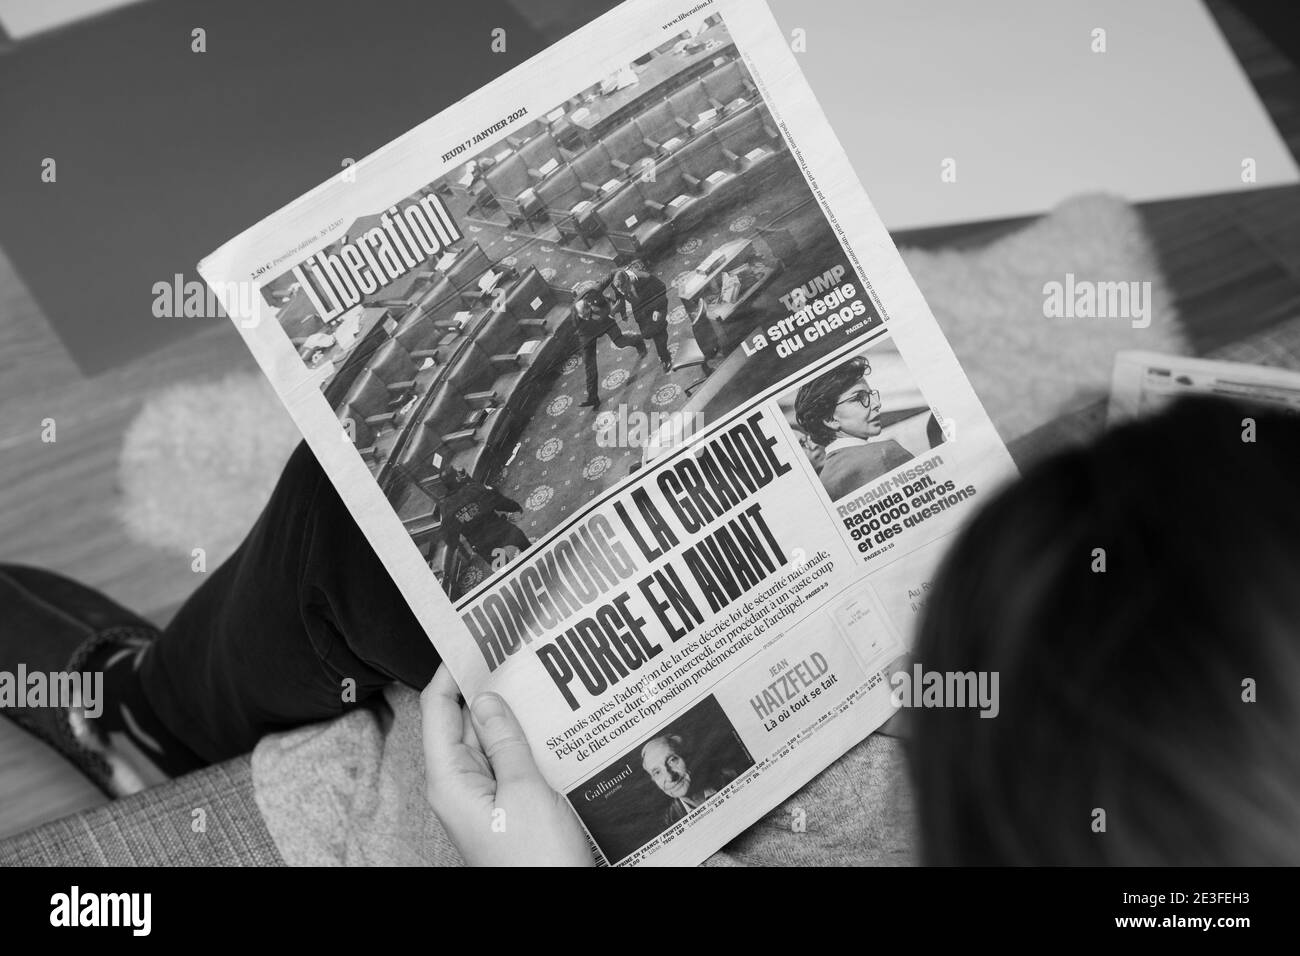 Paris, France - Jan 7, 2020: black and white image woman reading on couch French newspaper Liberation in front page show storming of the U.S. Capitol by supporters of U.S. President Donald Trump Stock Photo